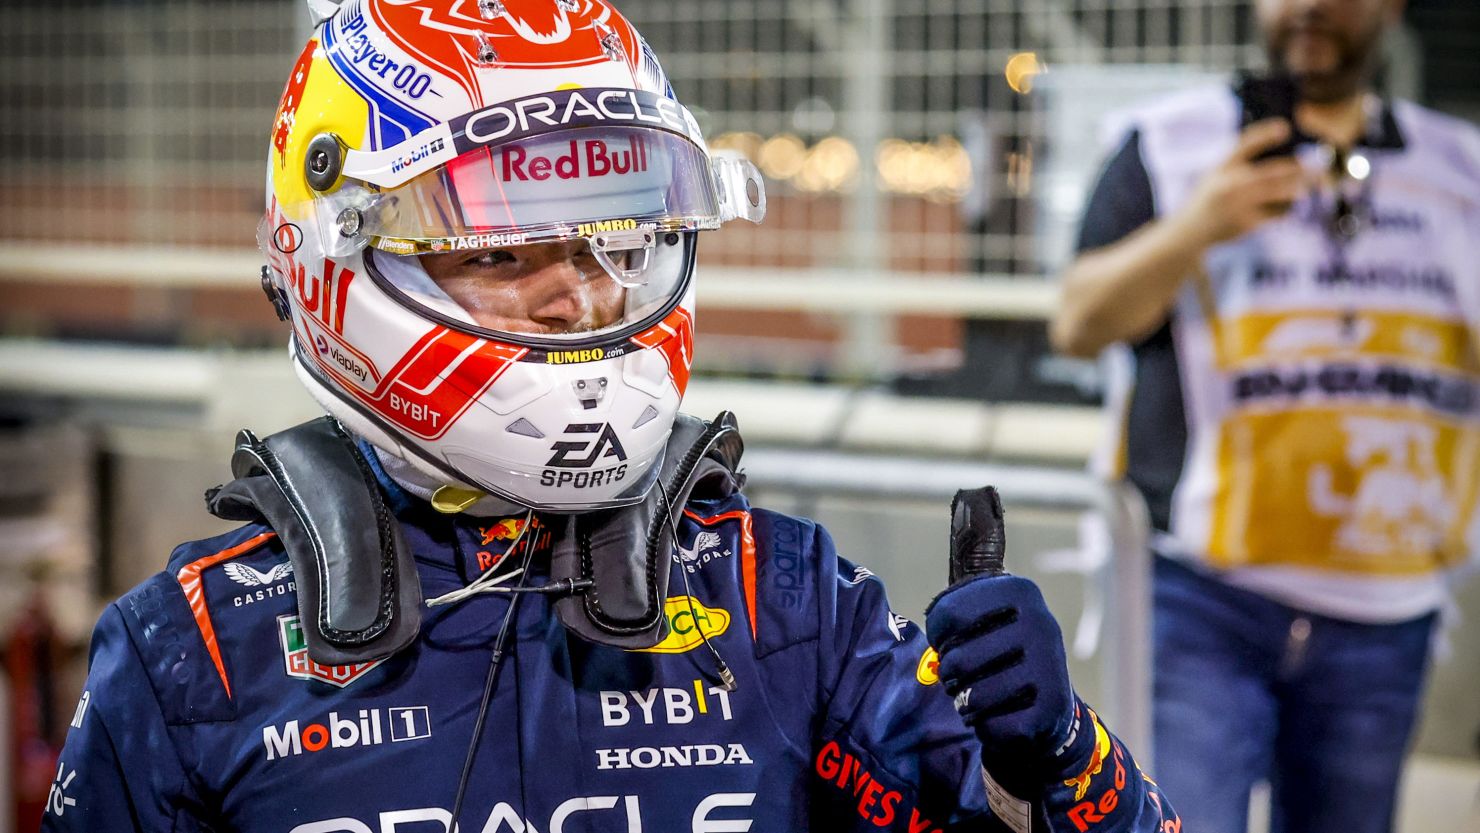 Max Verstappen takes pole position during qualifying for the Bahrain Grand Prix.